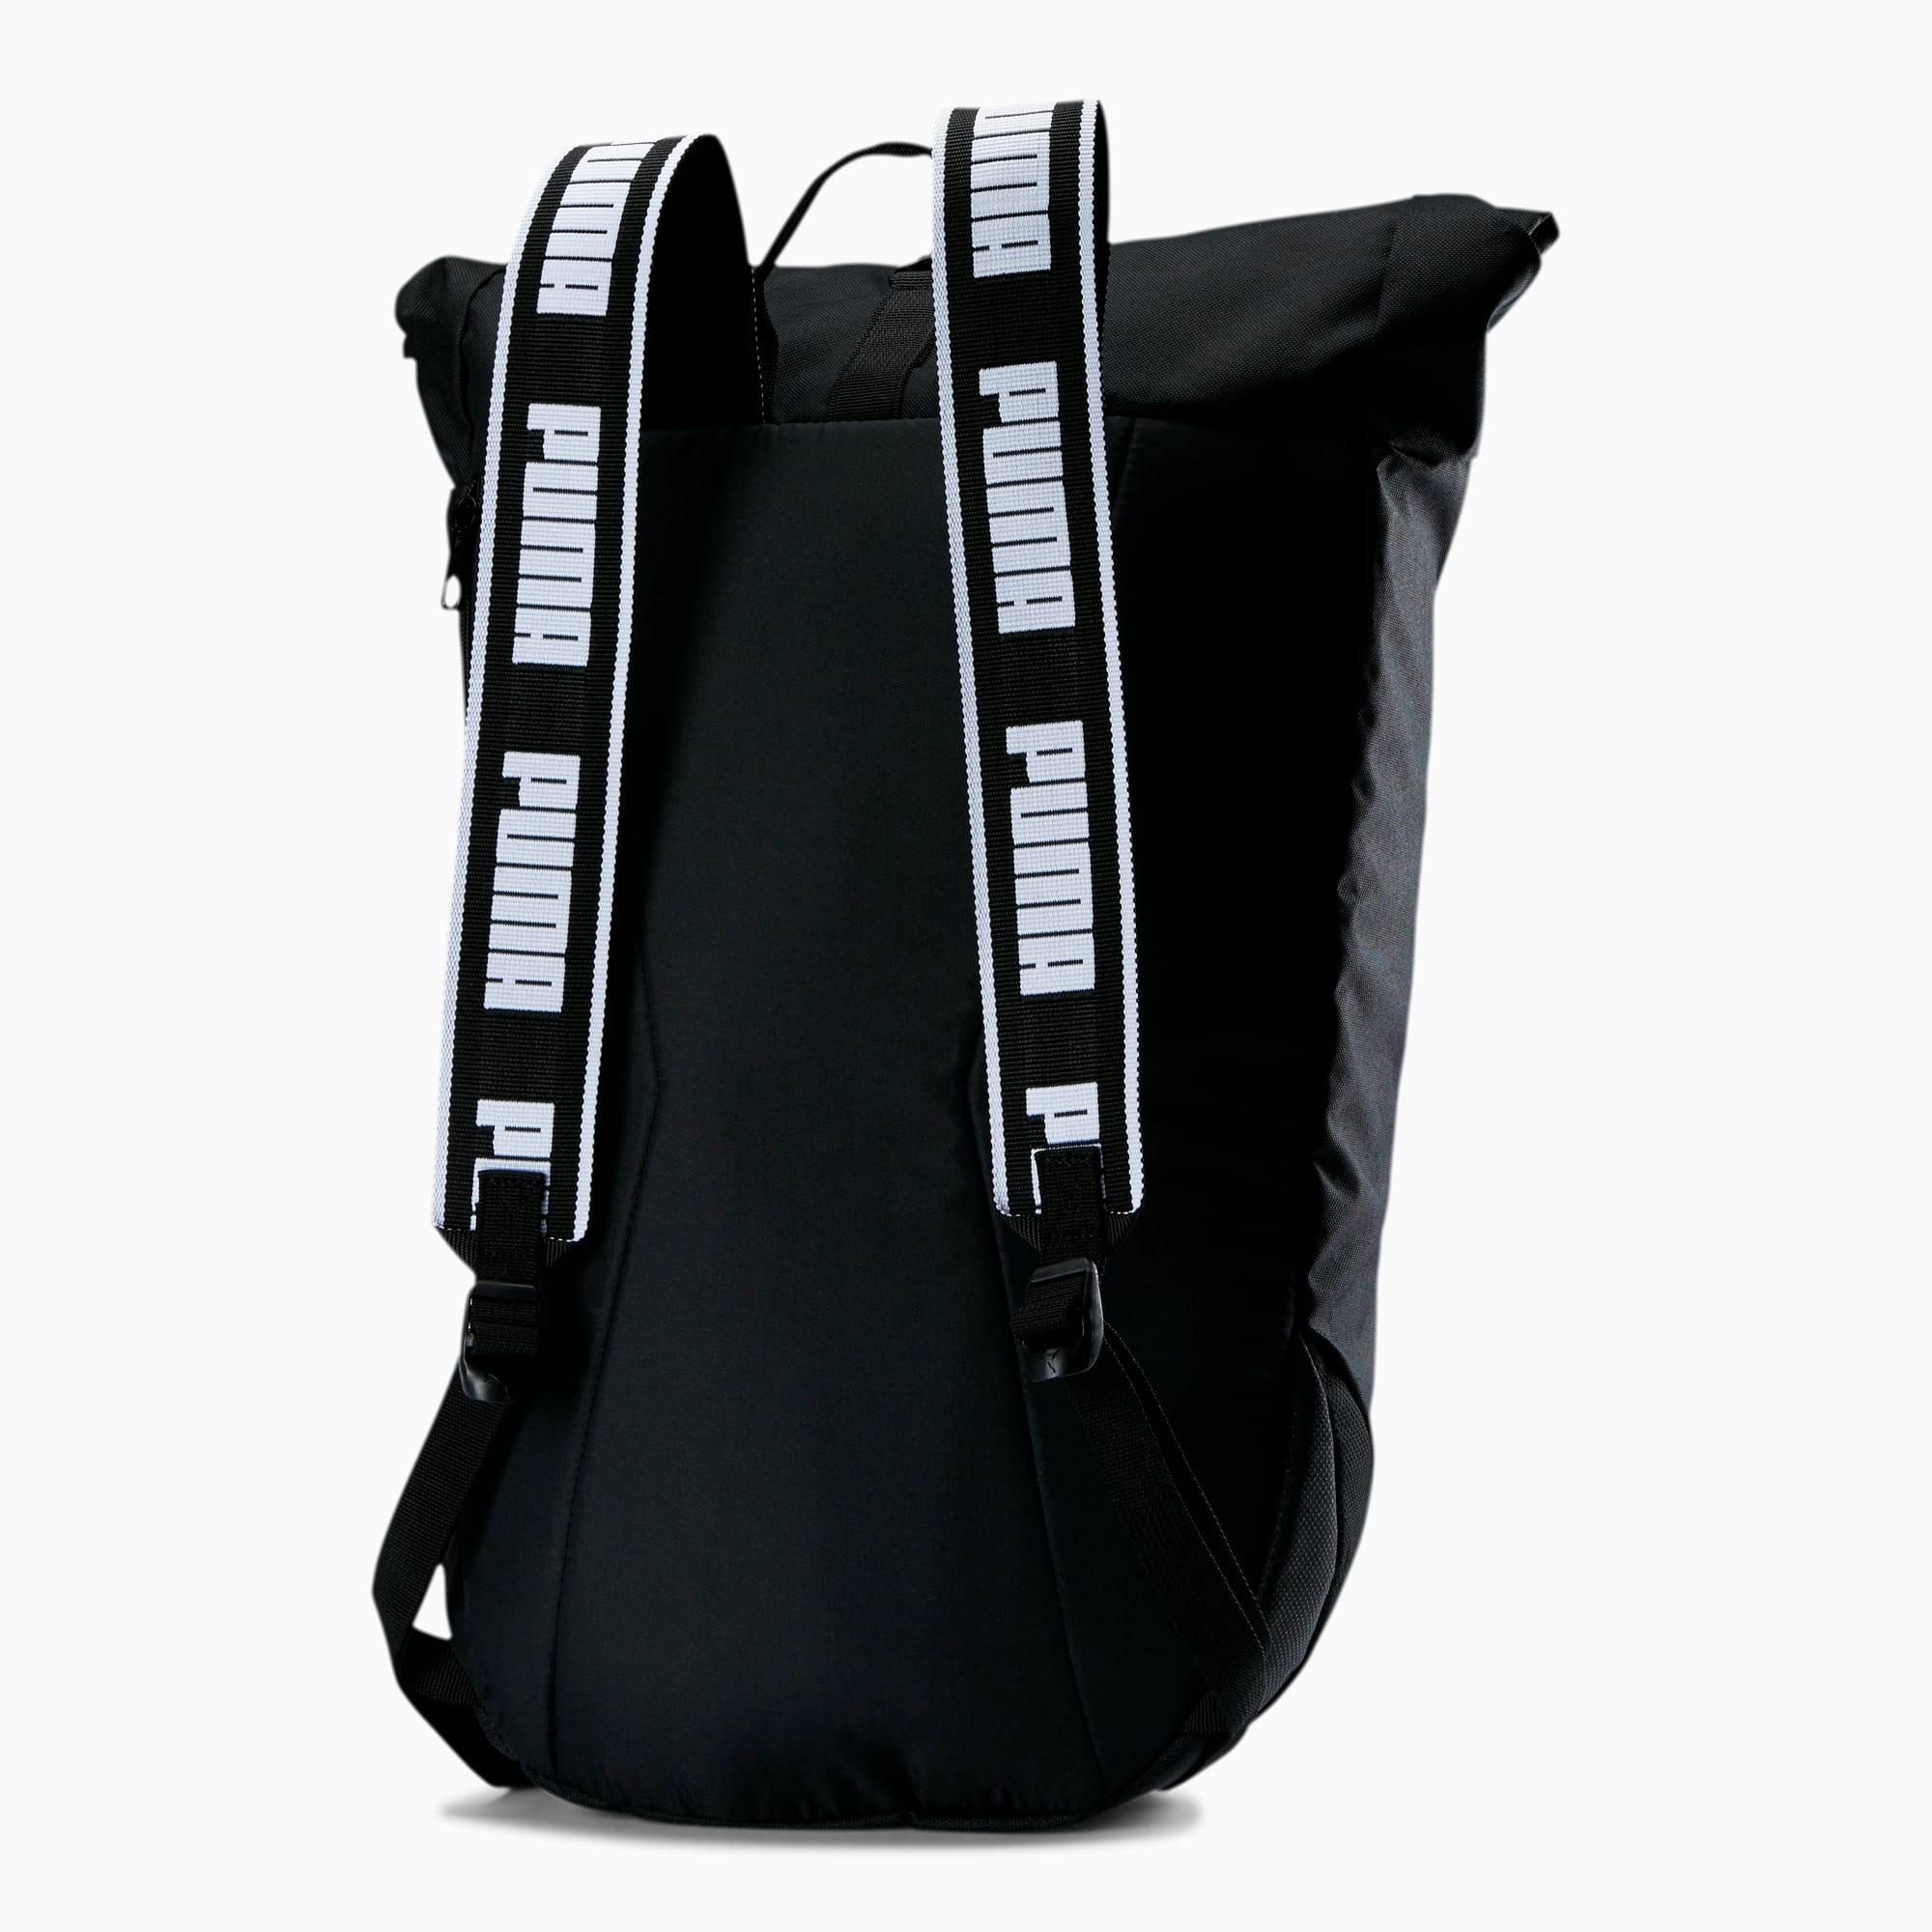 PUMA Synthetic Aop Roll Top Backpack in Black - Lyst